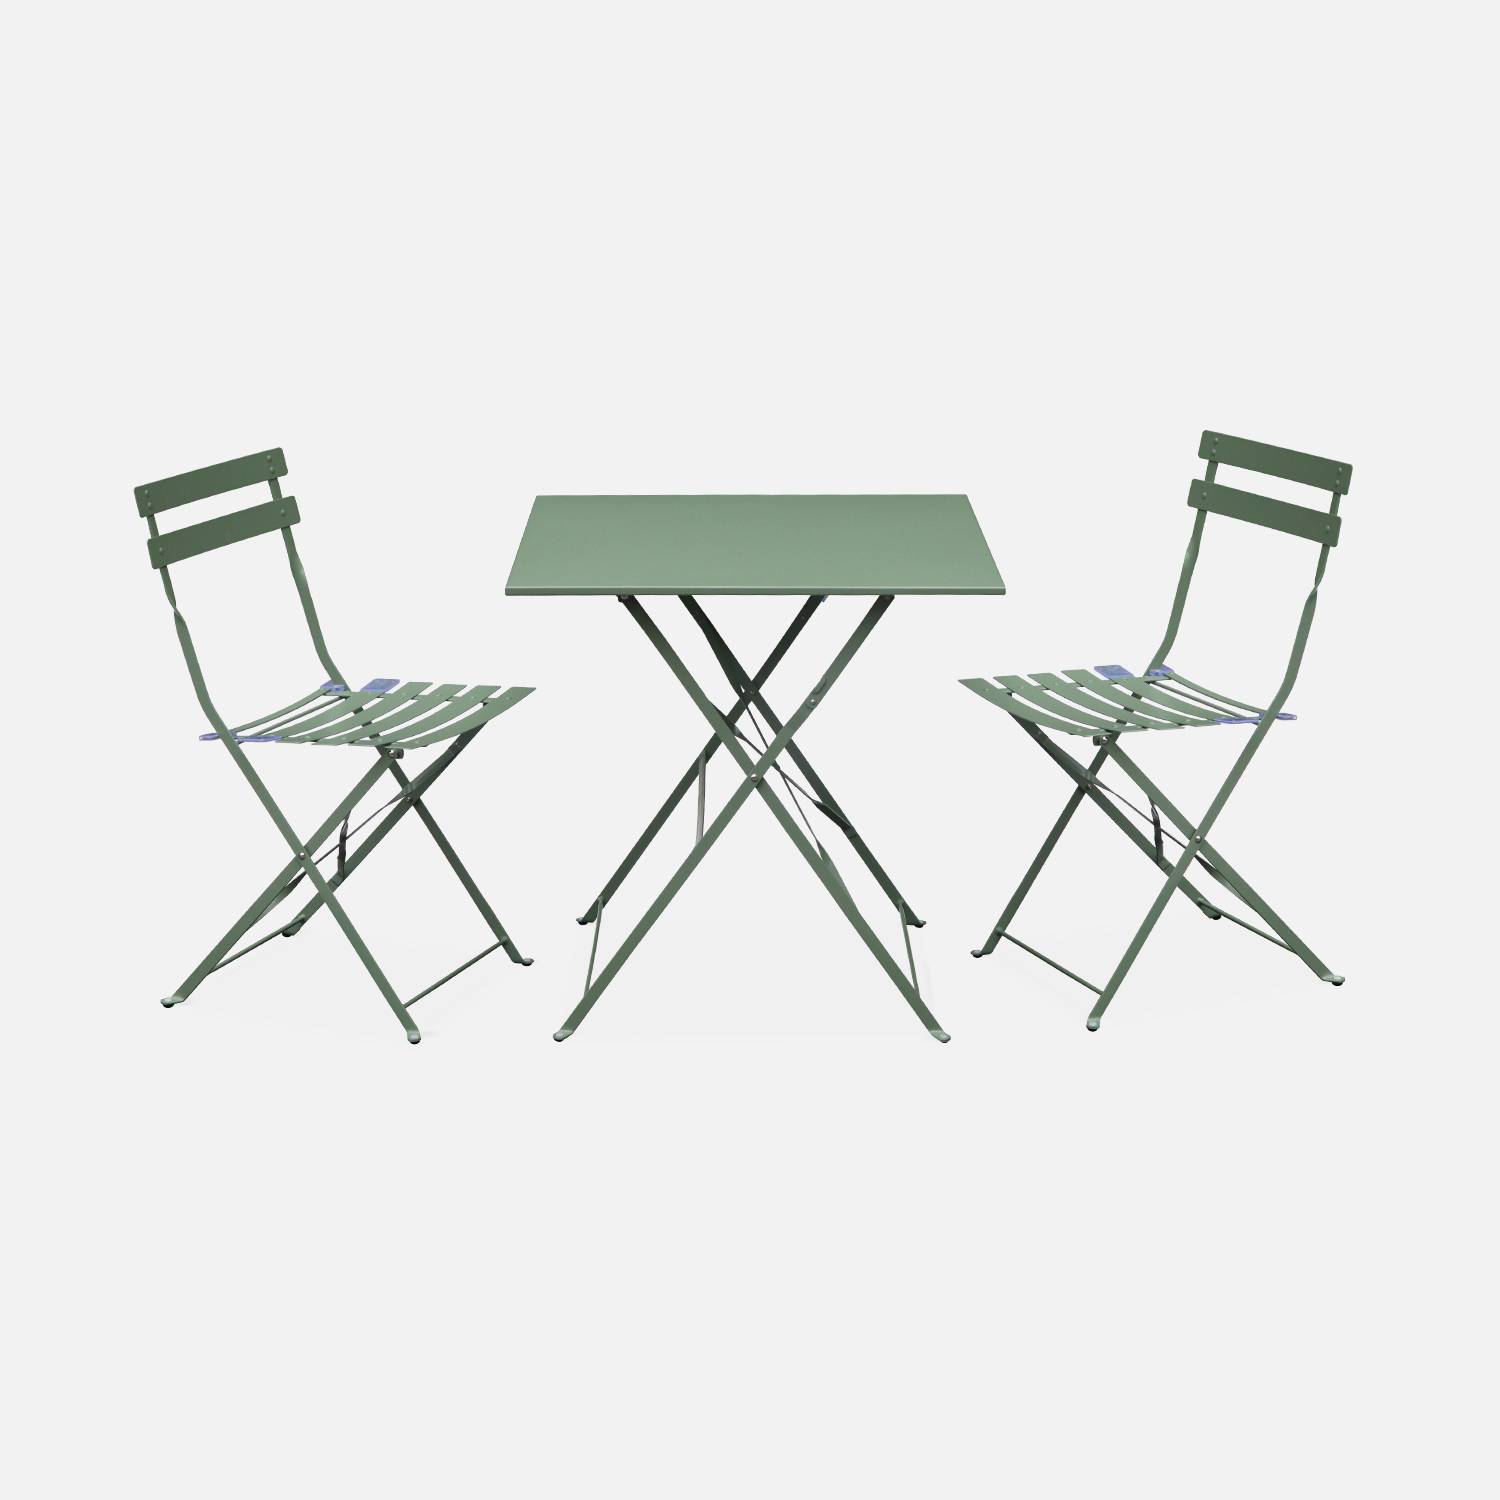 2-seater foldable thermo-lacquered steel bistro garden table with chairs, 70x70cm, Sage geen | sweeek